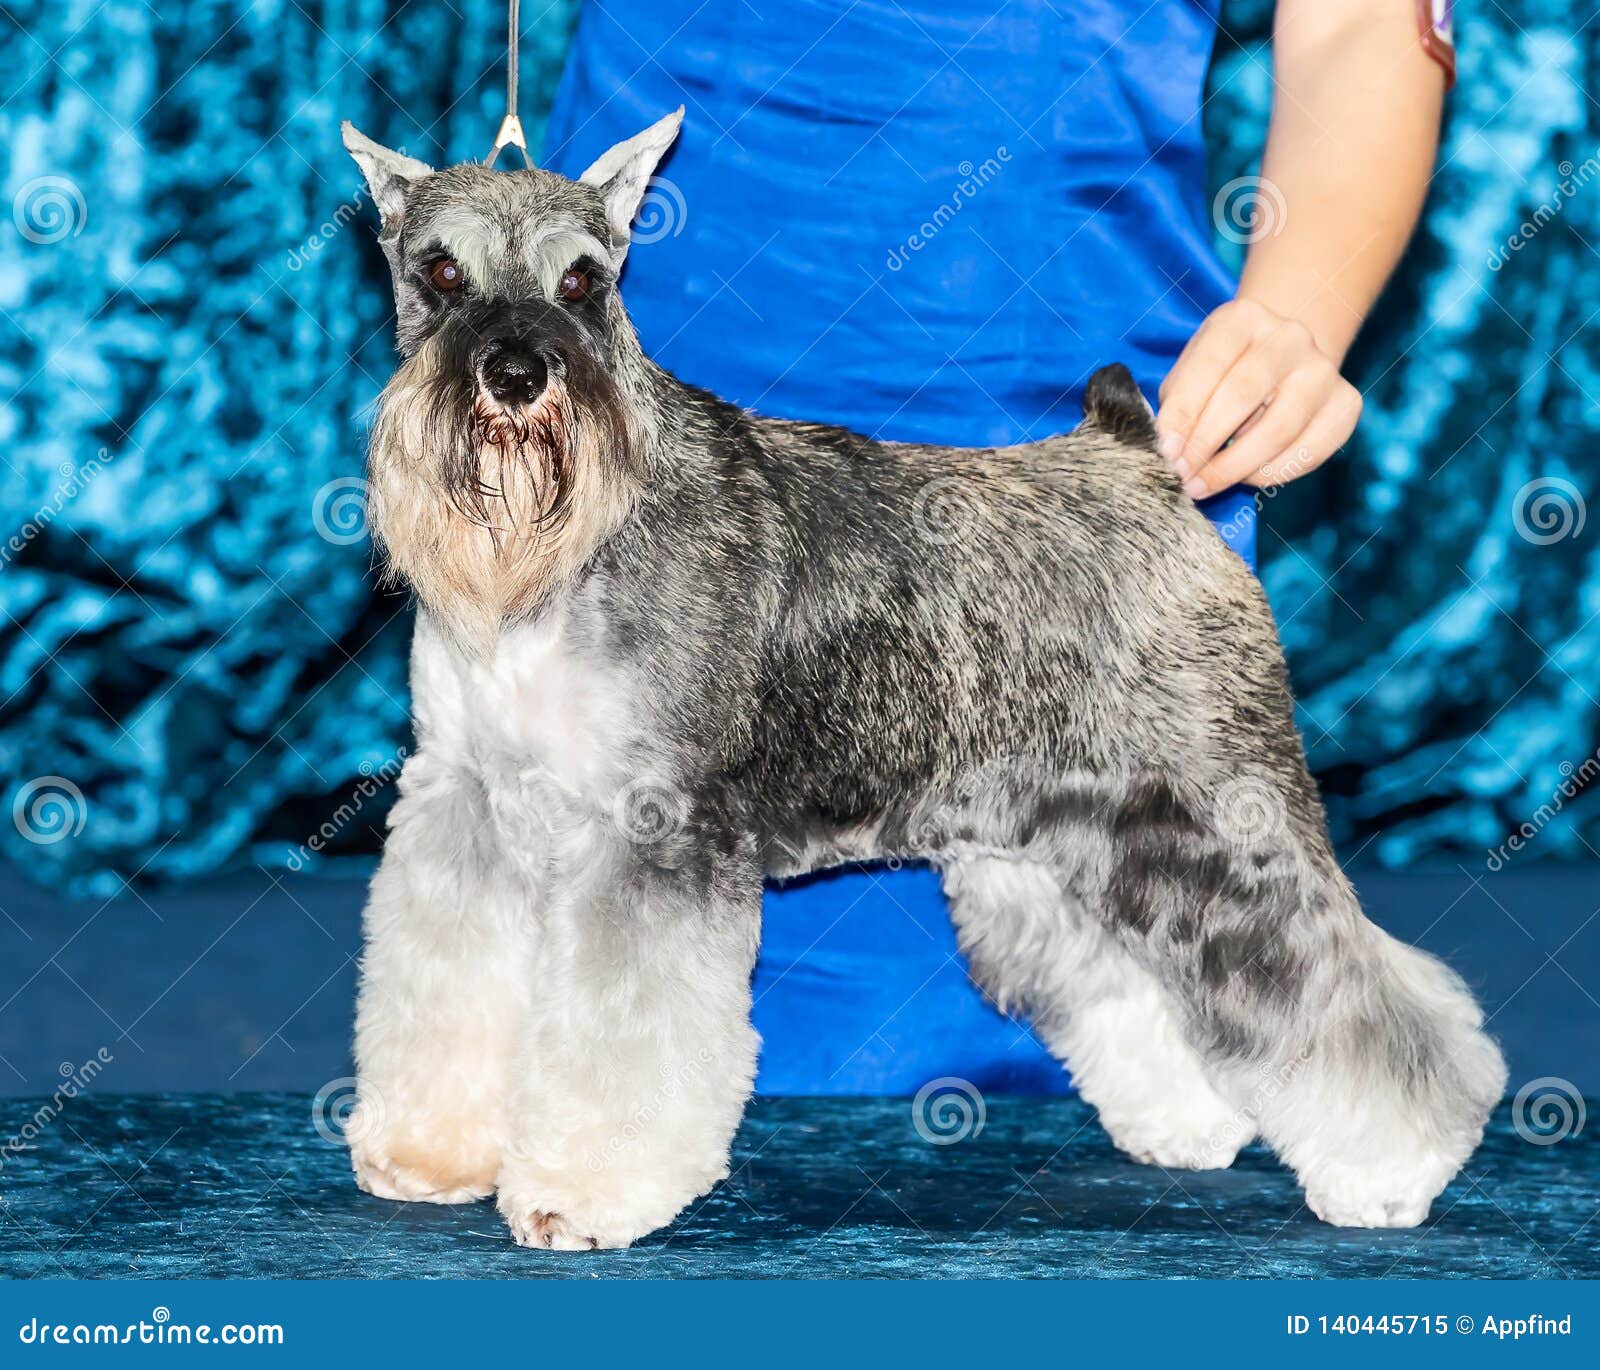 Black And White Miniature Schnauzers Stock Image Image Of Breeds Domestic 140445715